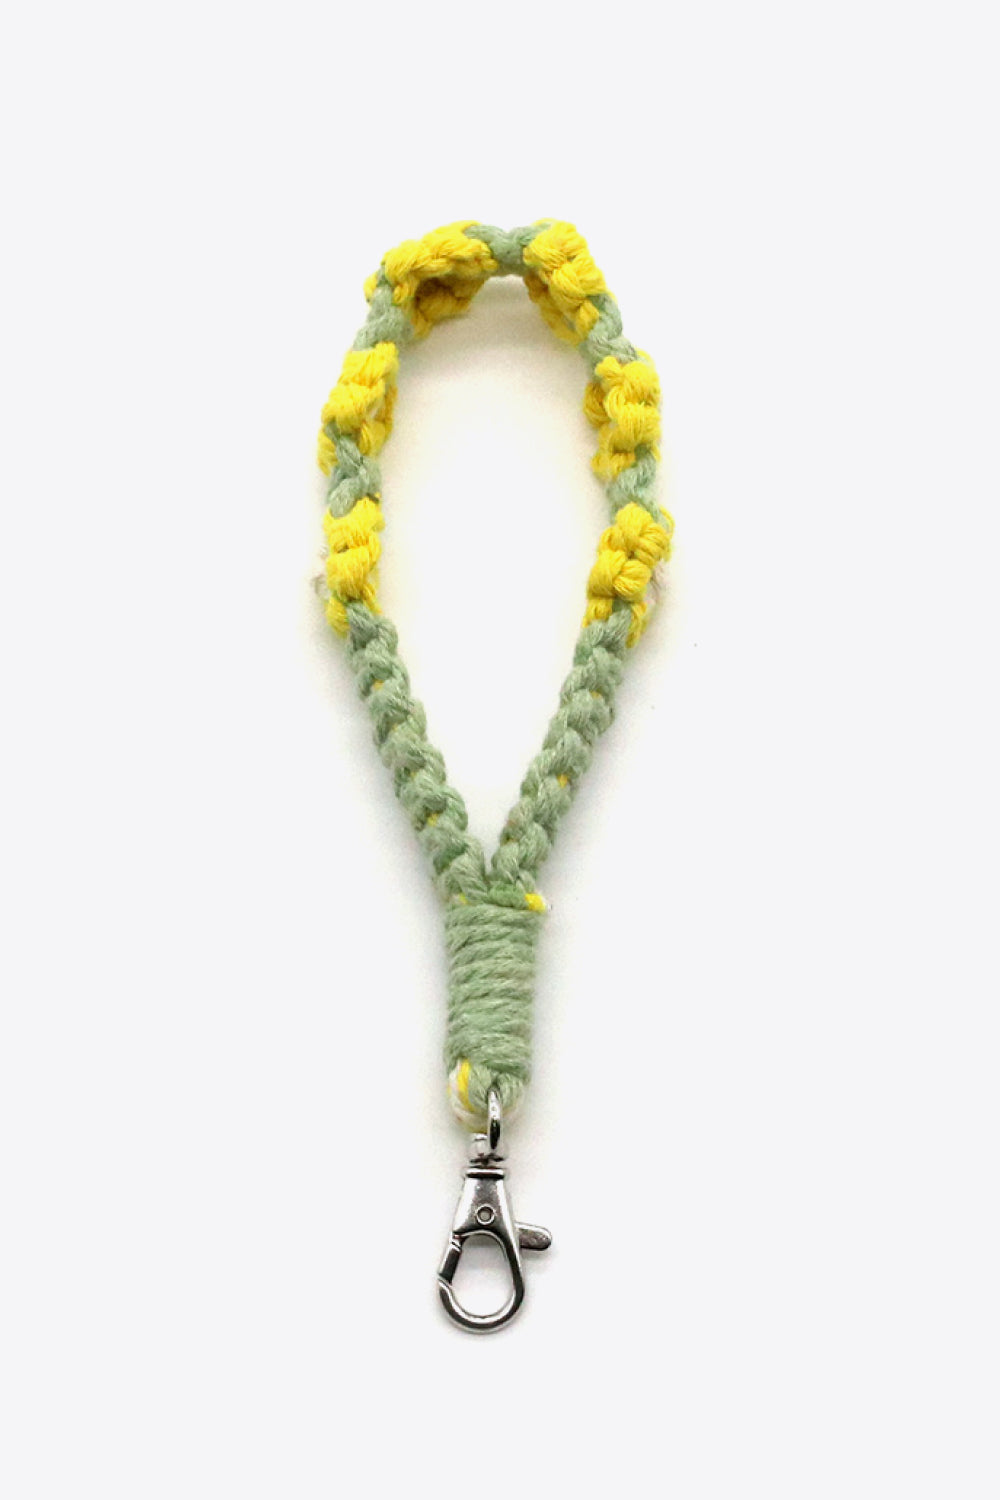 Trendsi Cupid Beauty Supplies Banana Yellow / One Size Keychains 4-Pack Hand-Woven Flower Macrame Wristlet Keychain, Color Varies